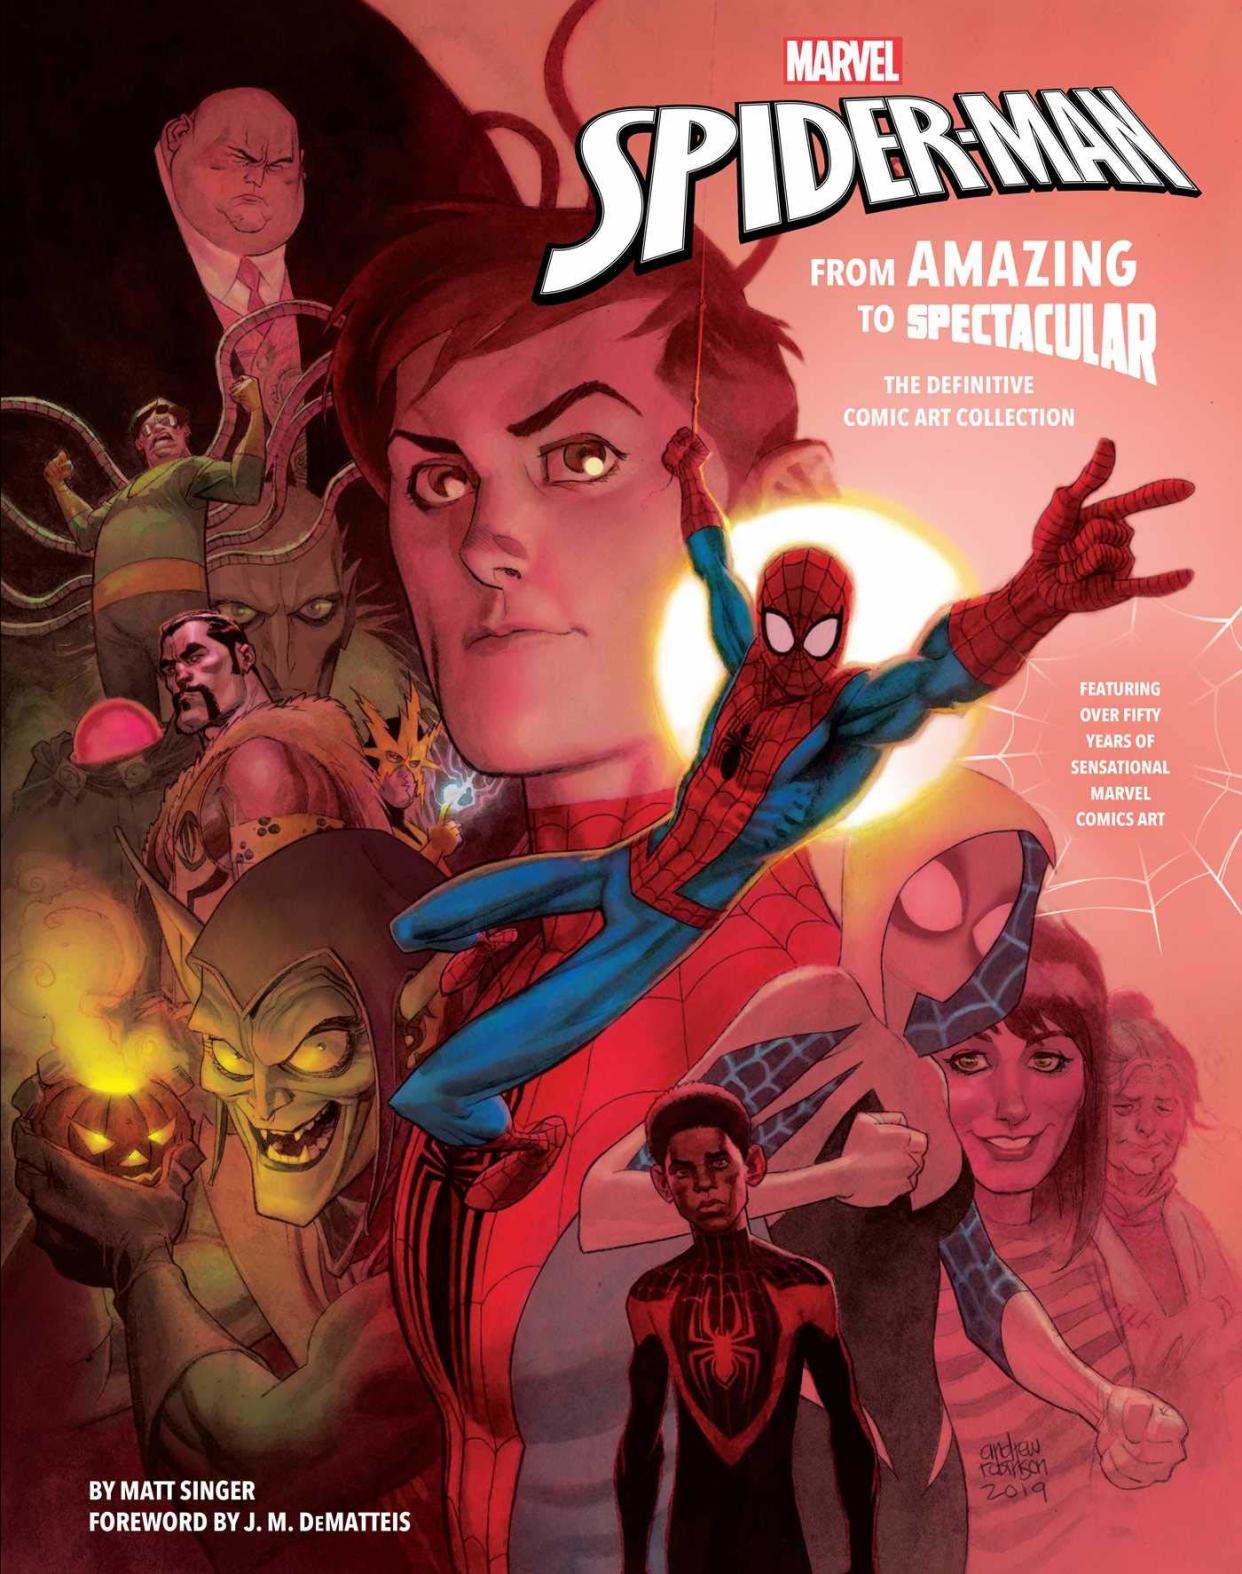 "Spider-Man: The Definitive Comic Art Collection"